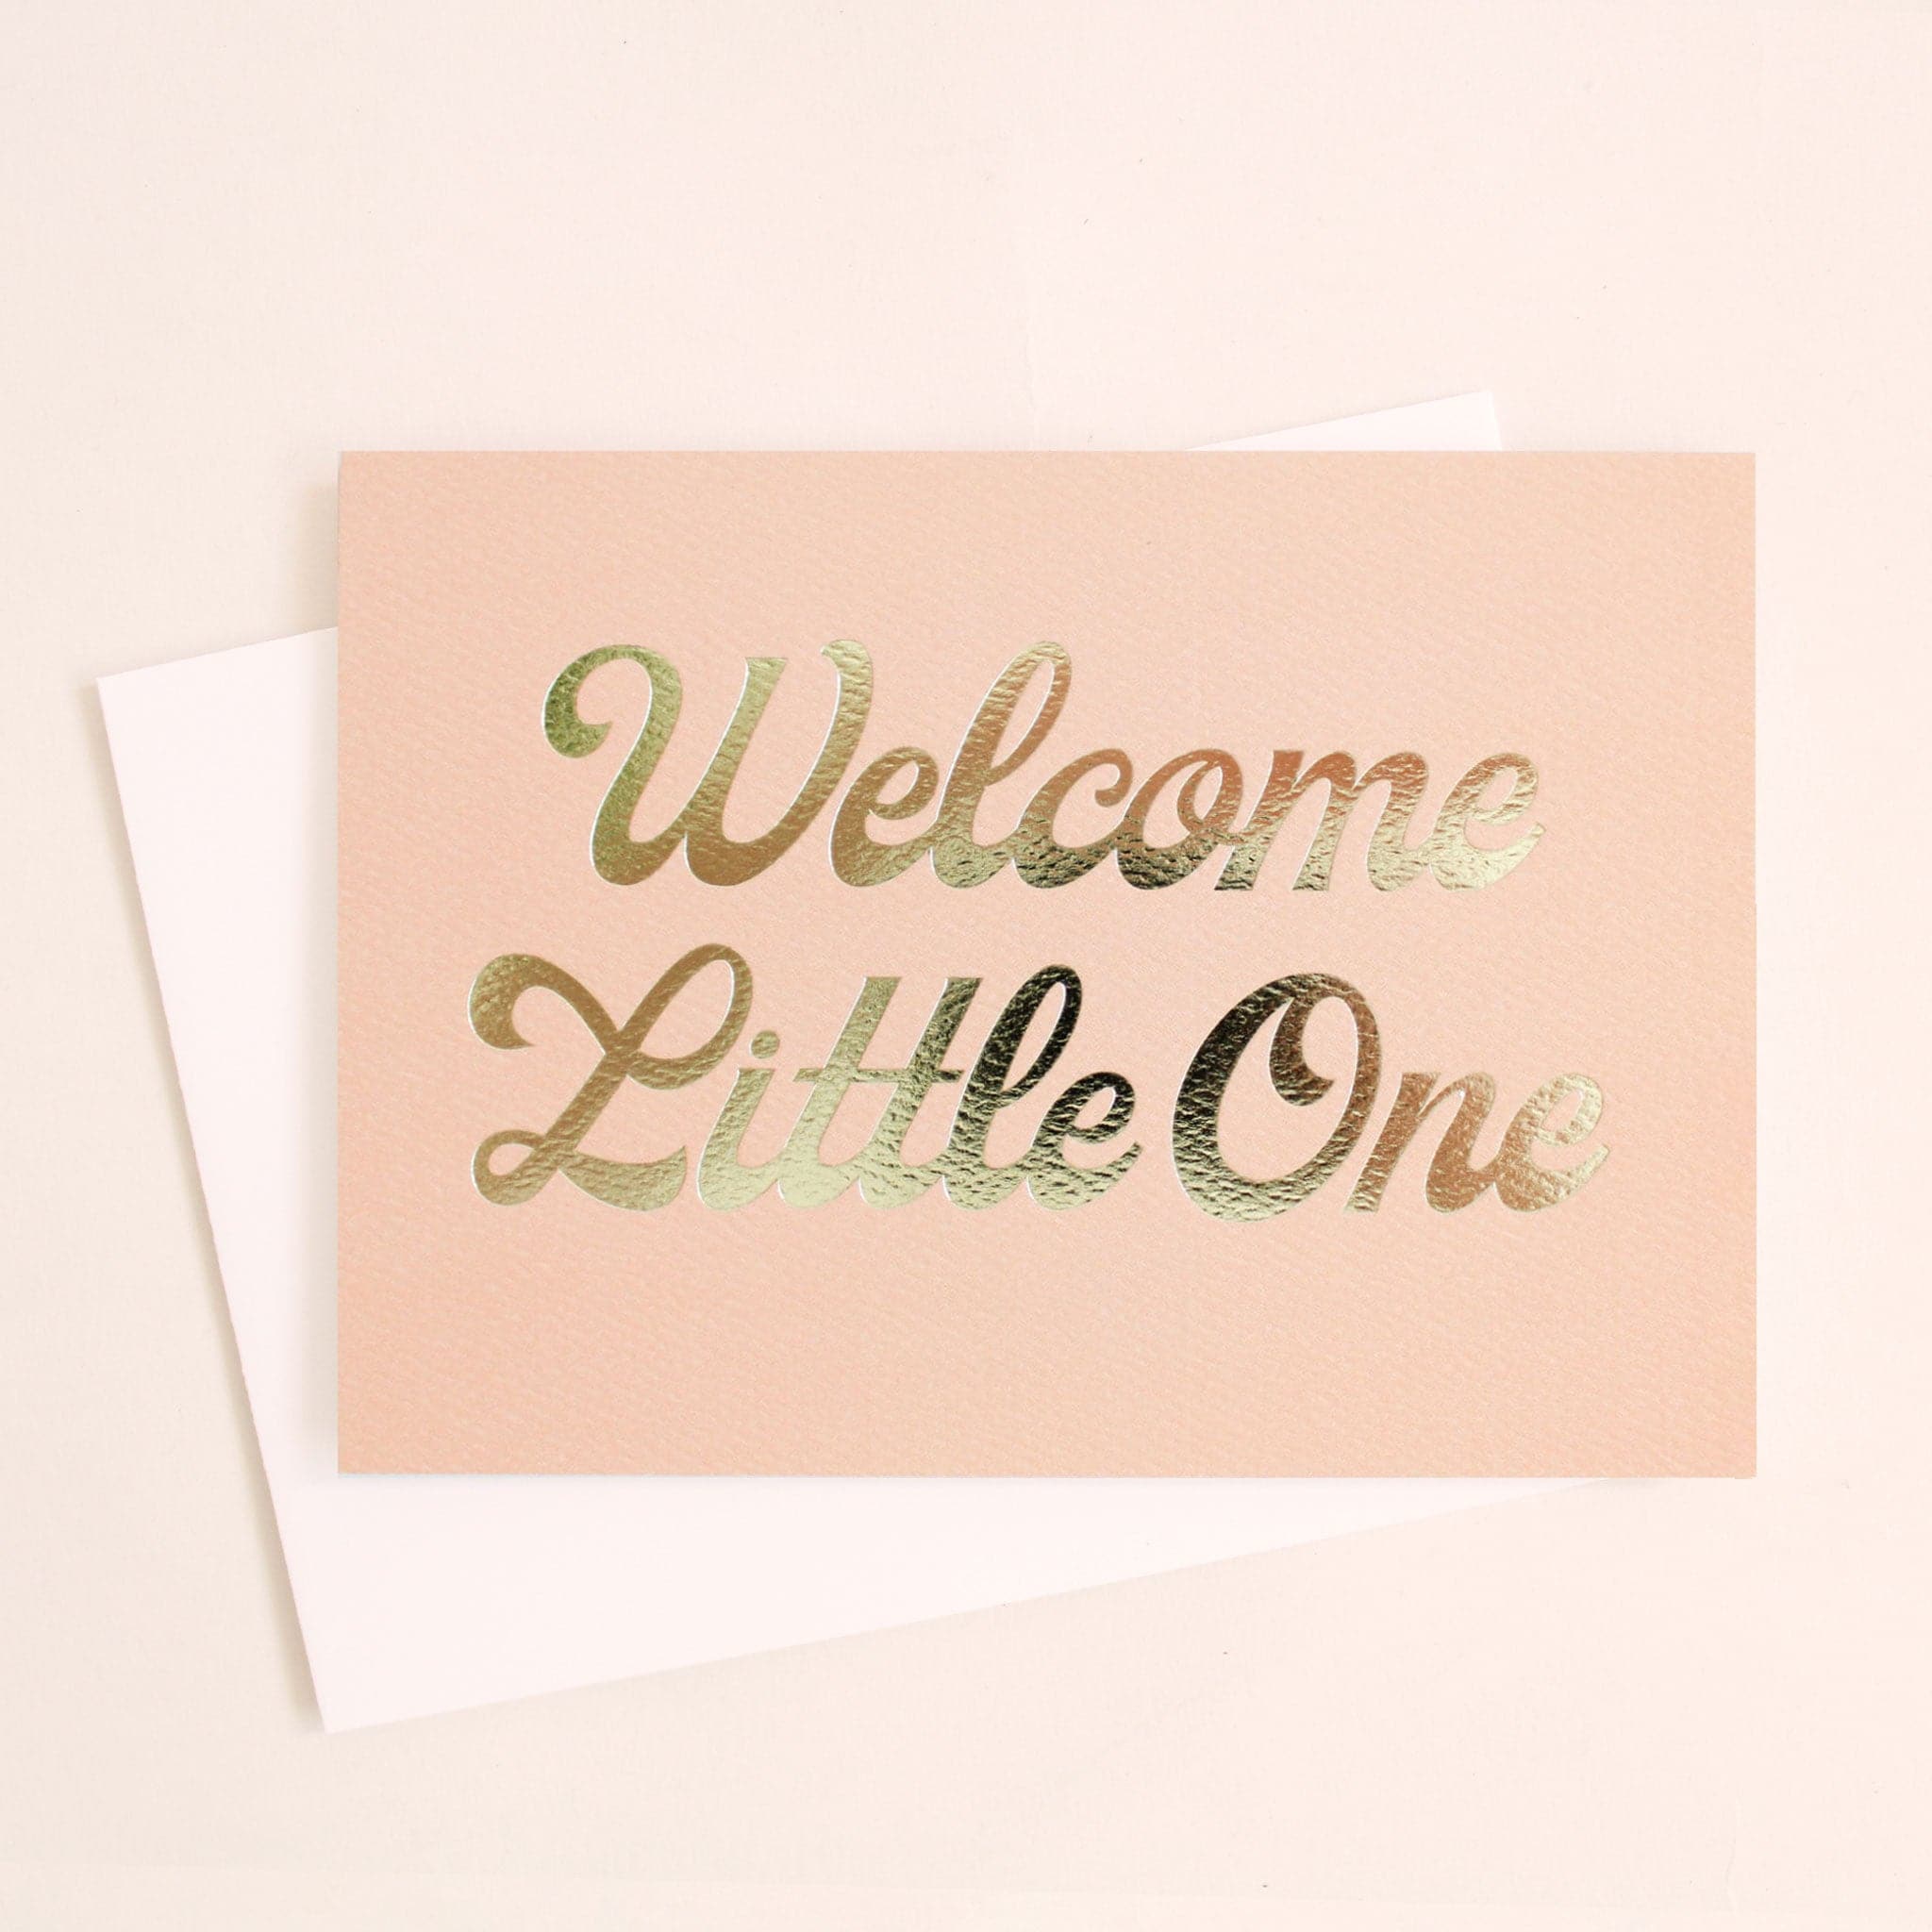 This card is a cloud peach color and reads 'Welcome Little One' in gold foil cursive lettering. The text takes up majority of the card. The card is accompanied by a solid white envelope.